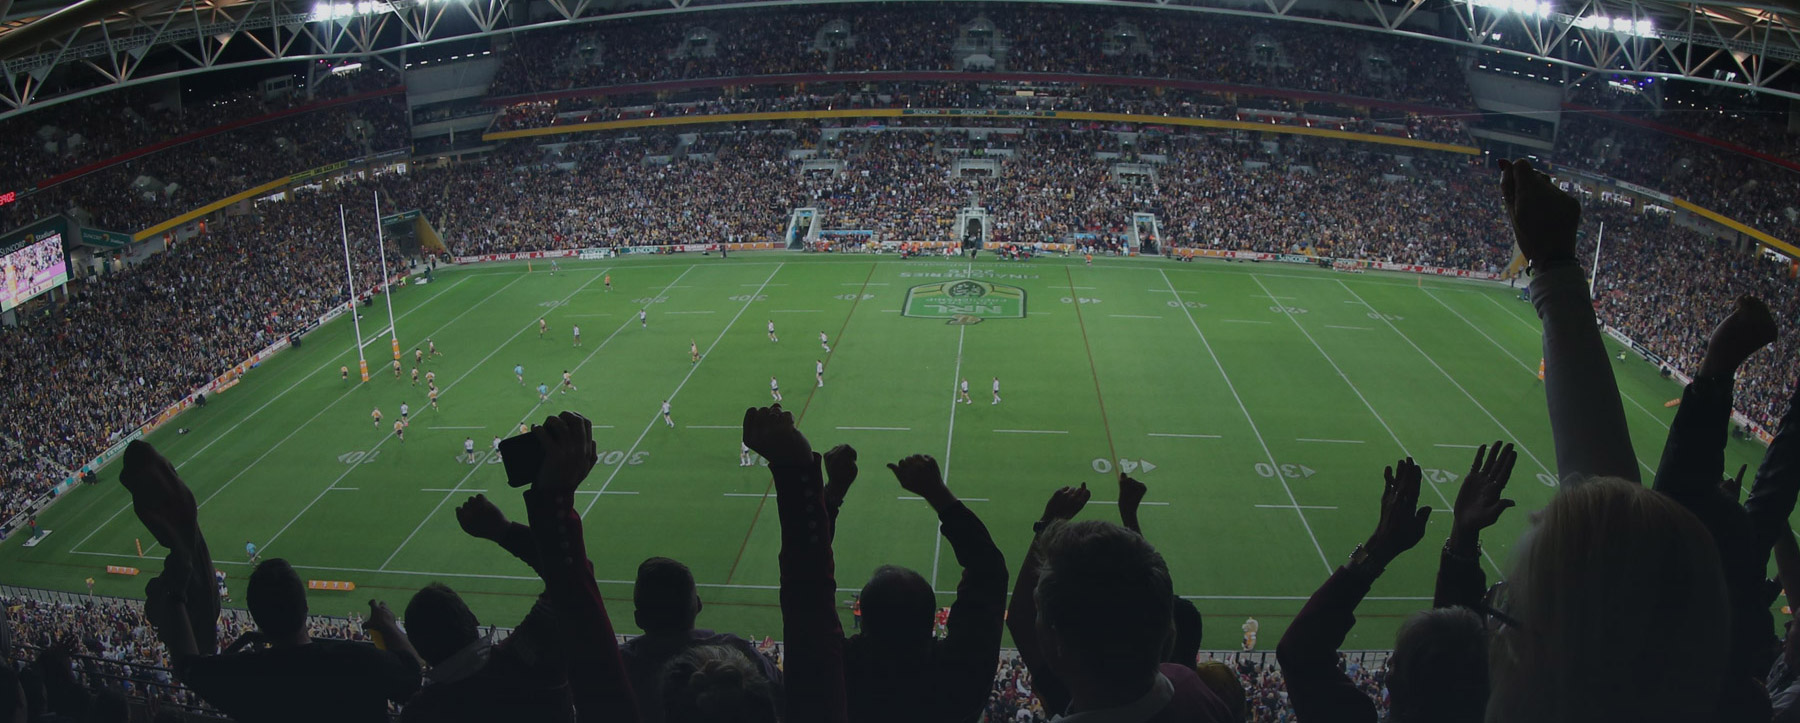 Introducing FanTribe, the ultimate in sports fan engagement experiences